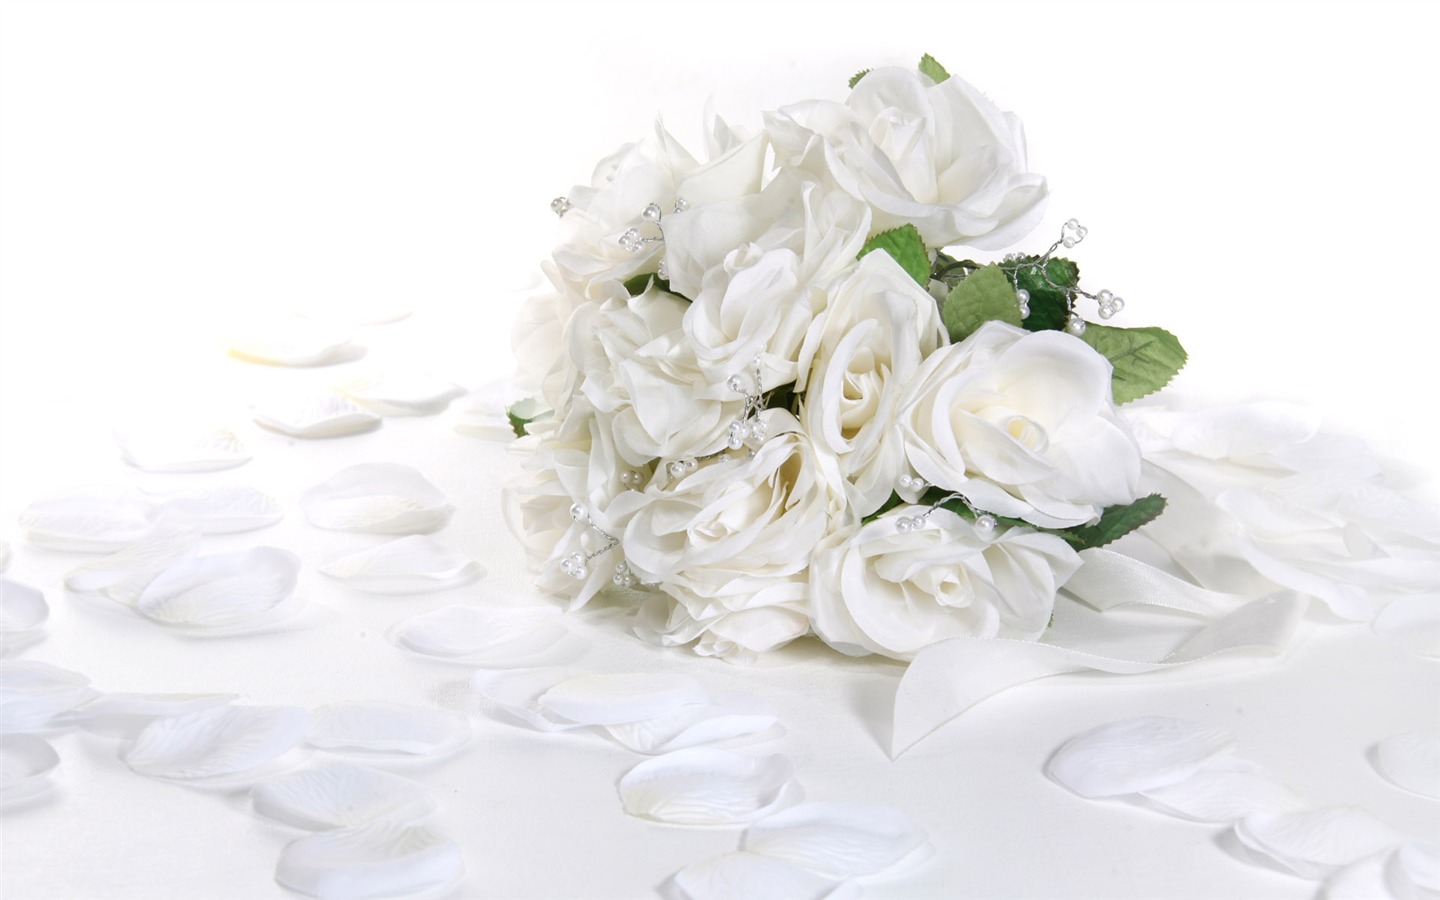 Weddings and Flowers wallpaper (2) #2 - 1440x900